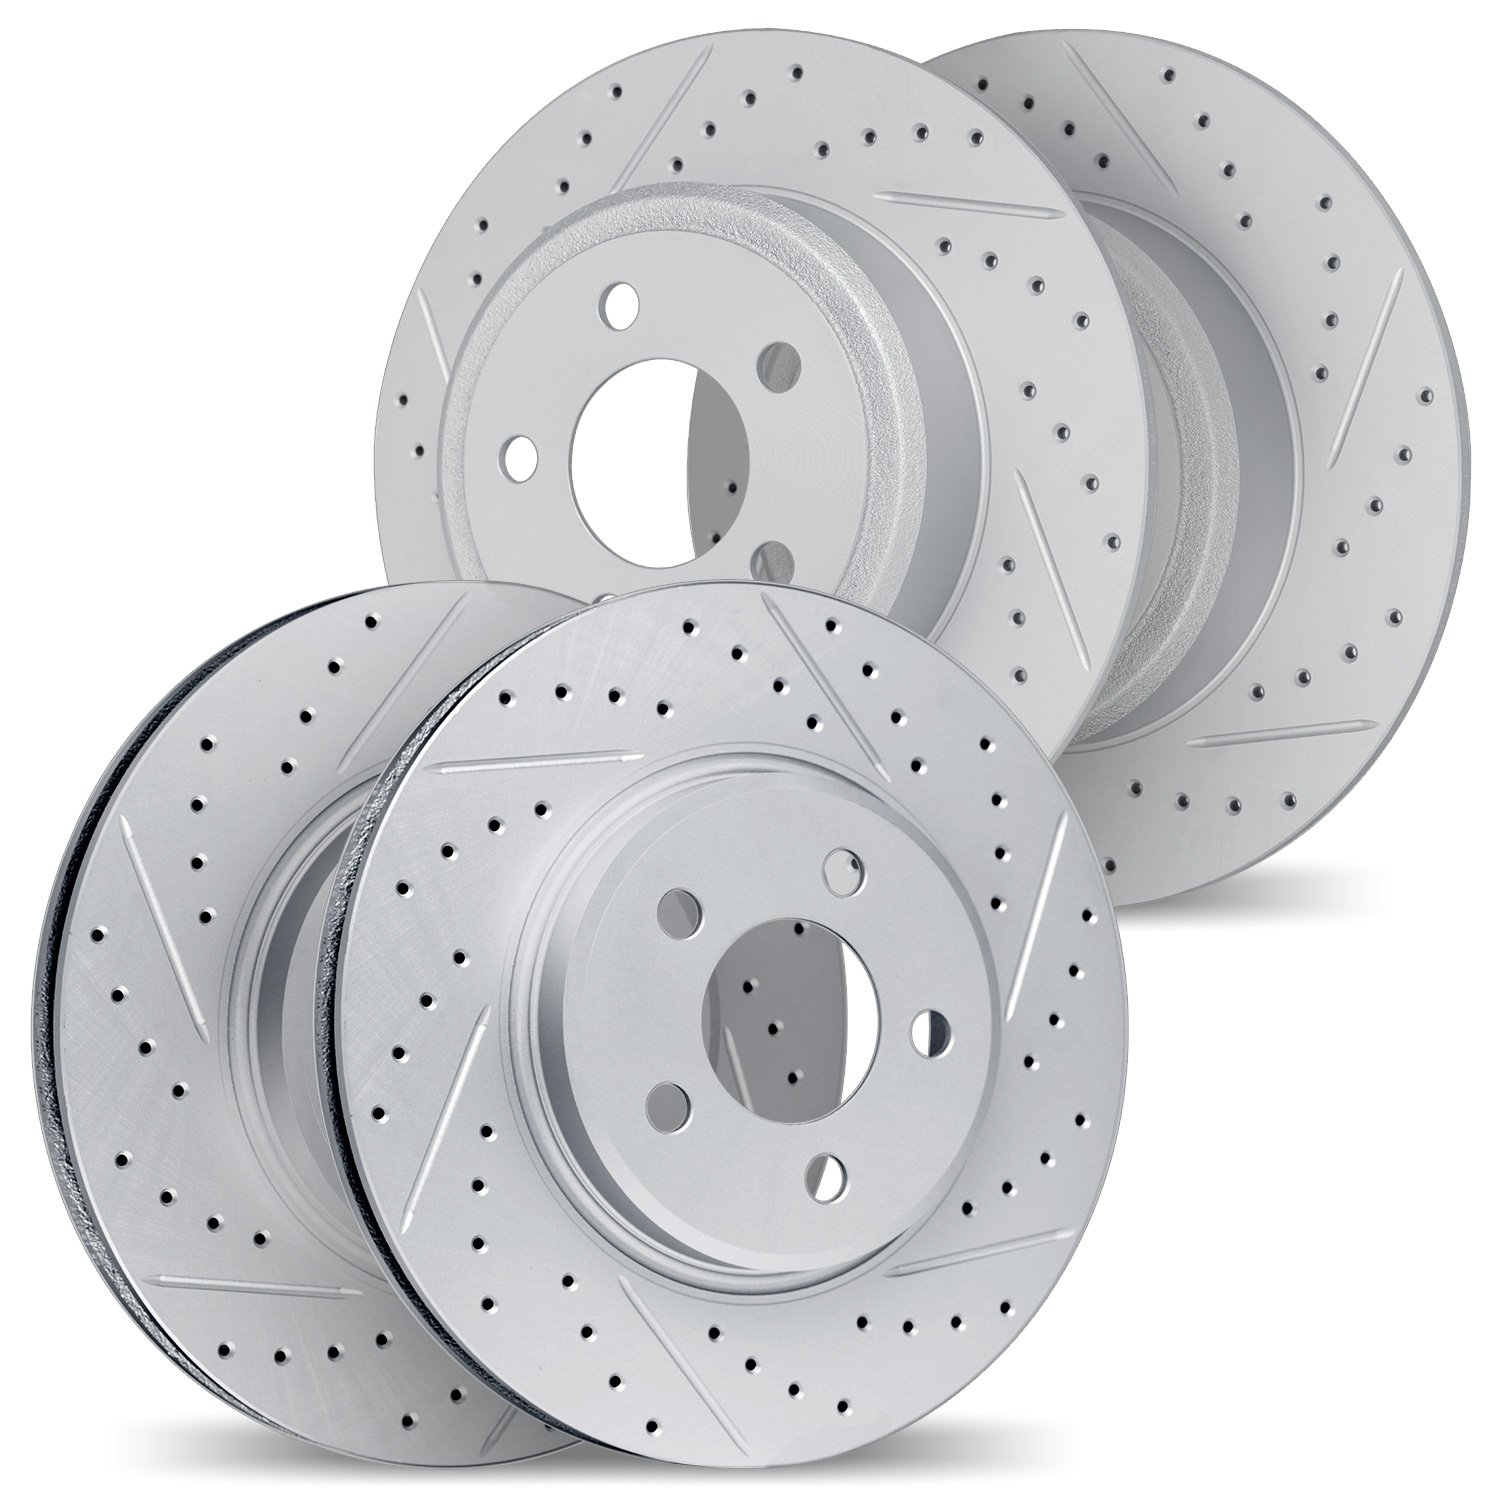 2004-03051 Geoperformance Drilled/Slotted Brake Rotors, 2012-2016 Kia/Hyundai/Genesis, Position: Front and Rear